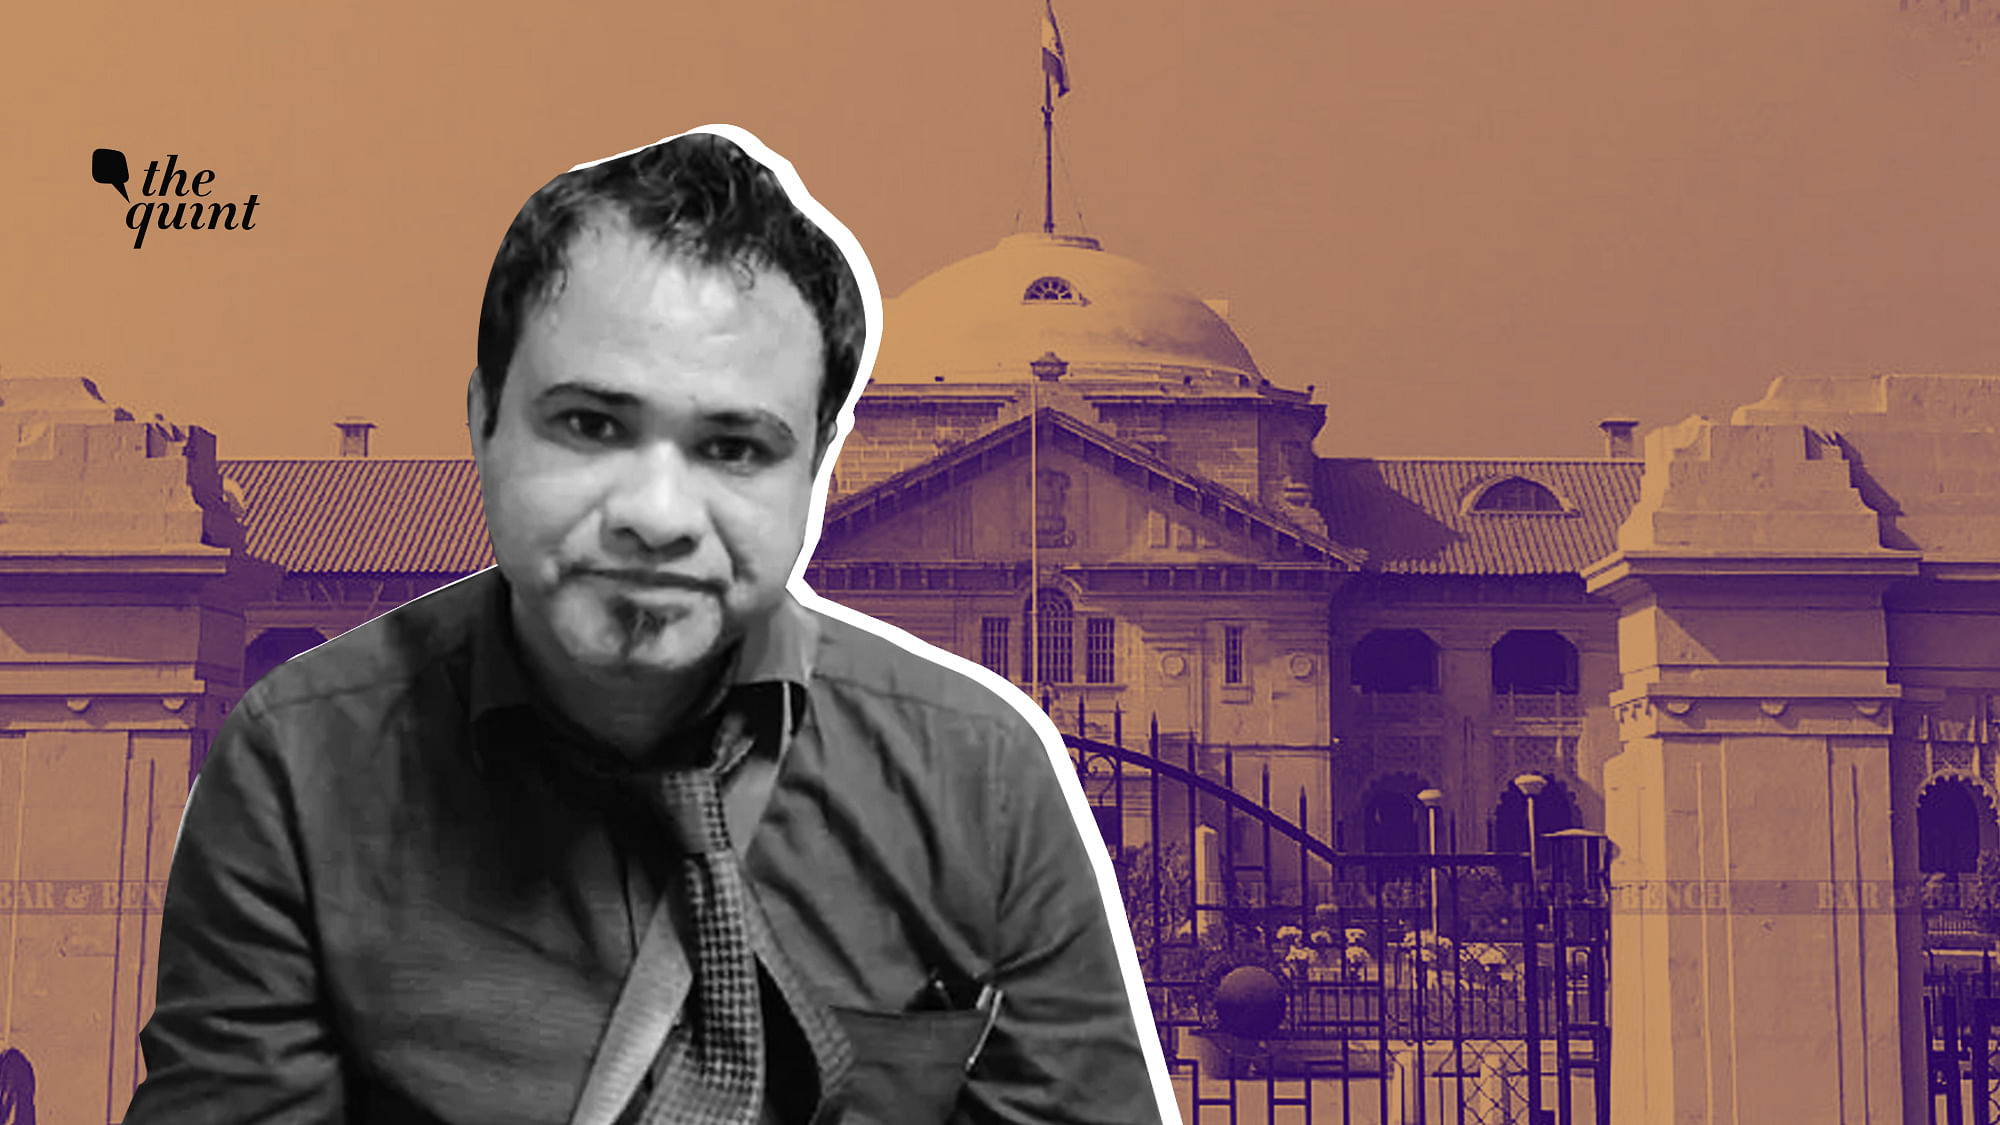 On 11 August, the Supreme Court had requested the Allahabad High Court to expeditiously decide the habeas corpus petition filed by Nuzhat Perween for her son, Dr Kafeel Khan.